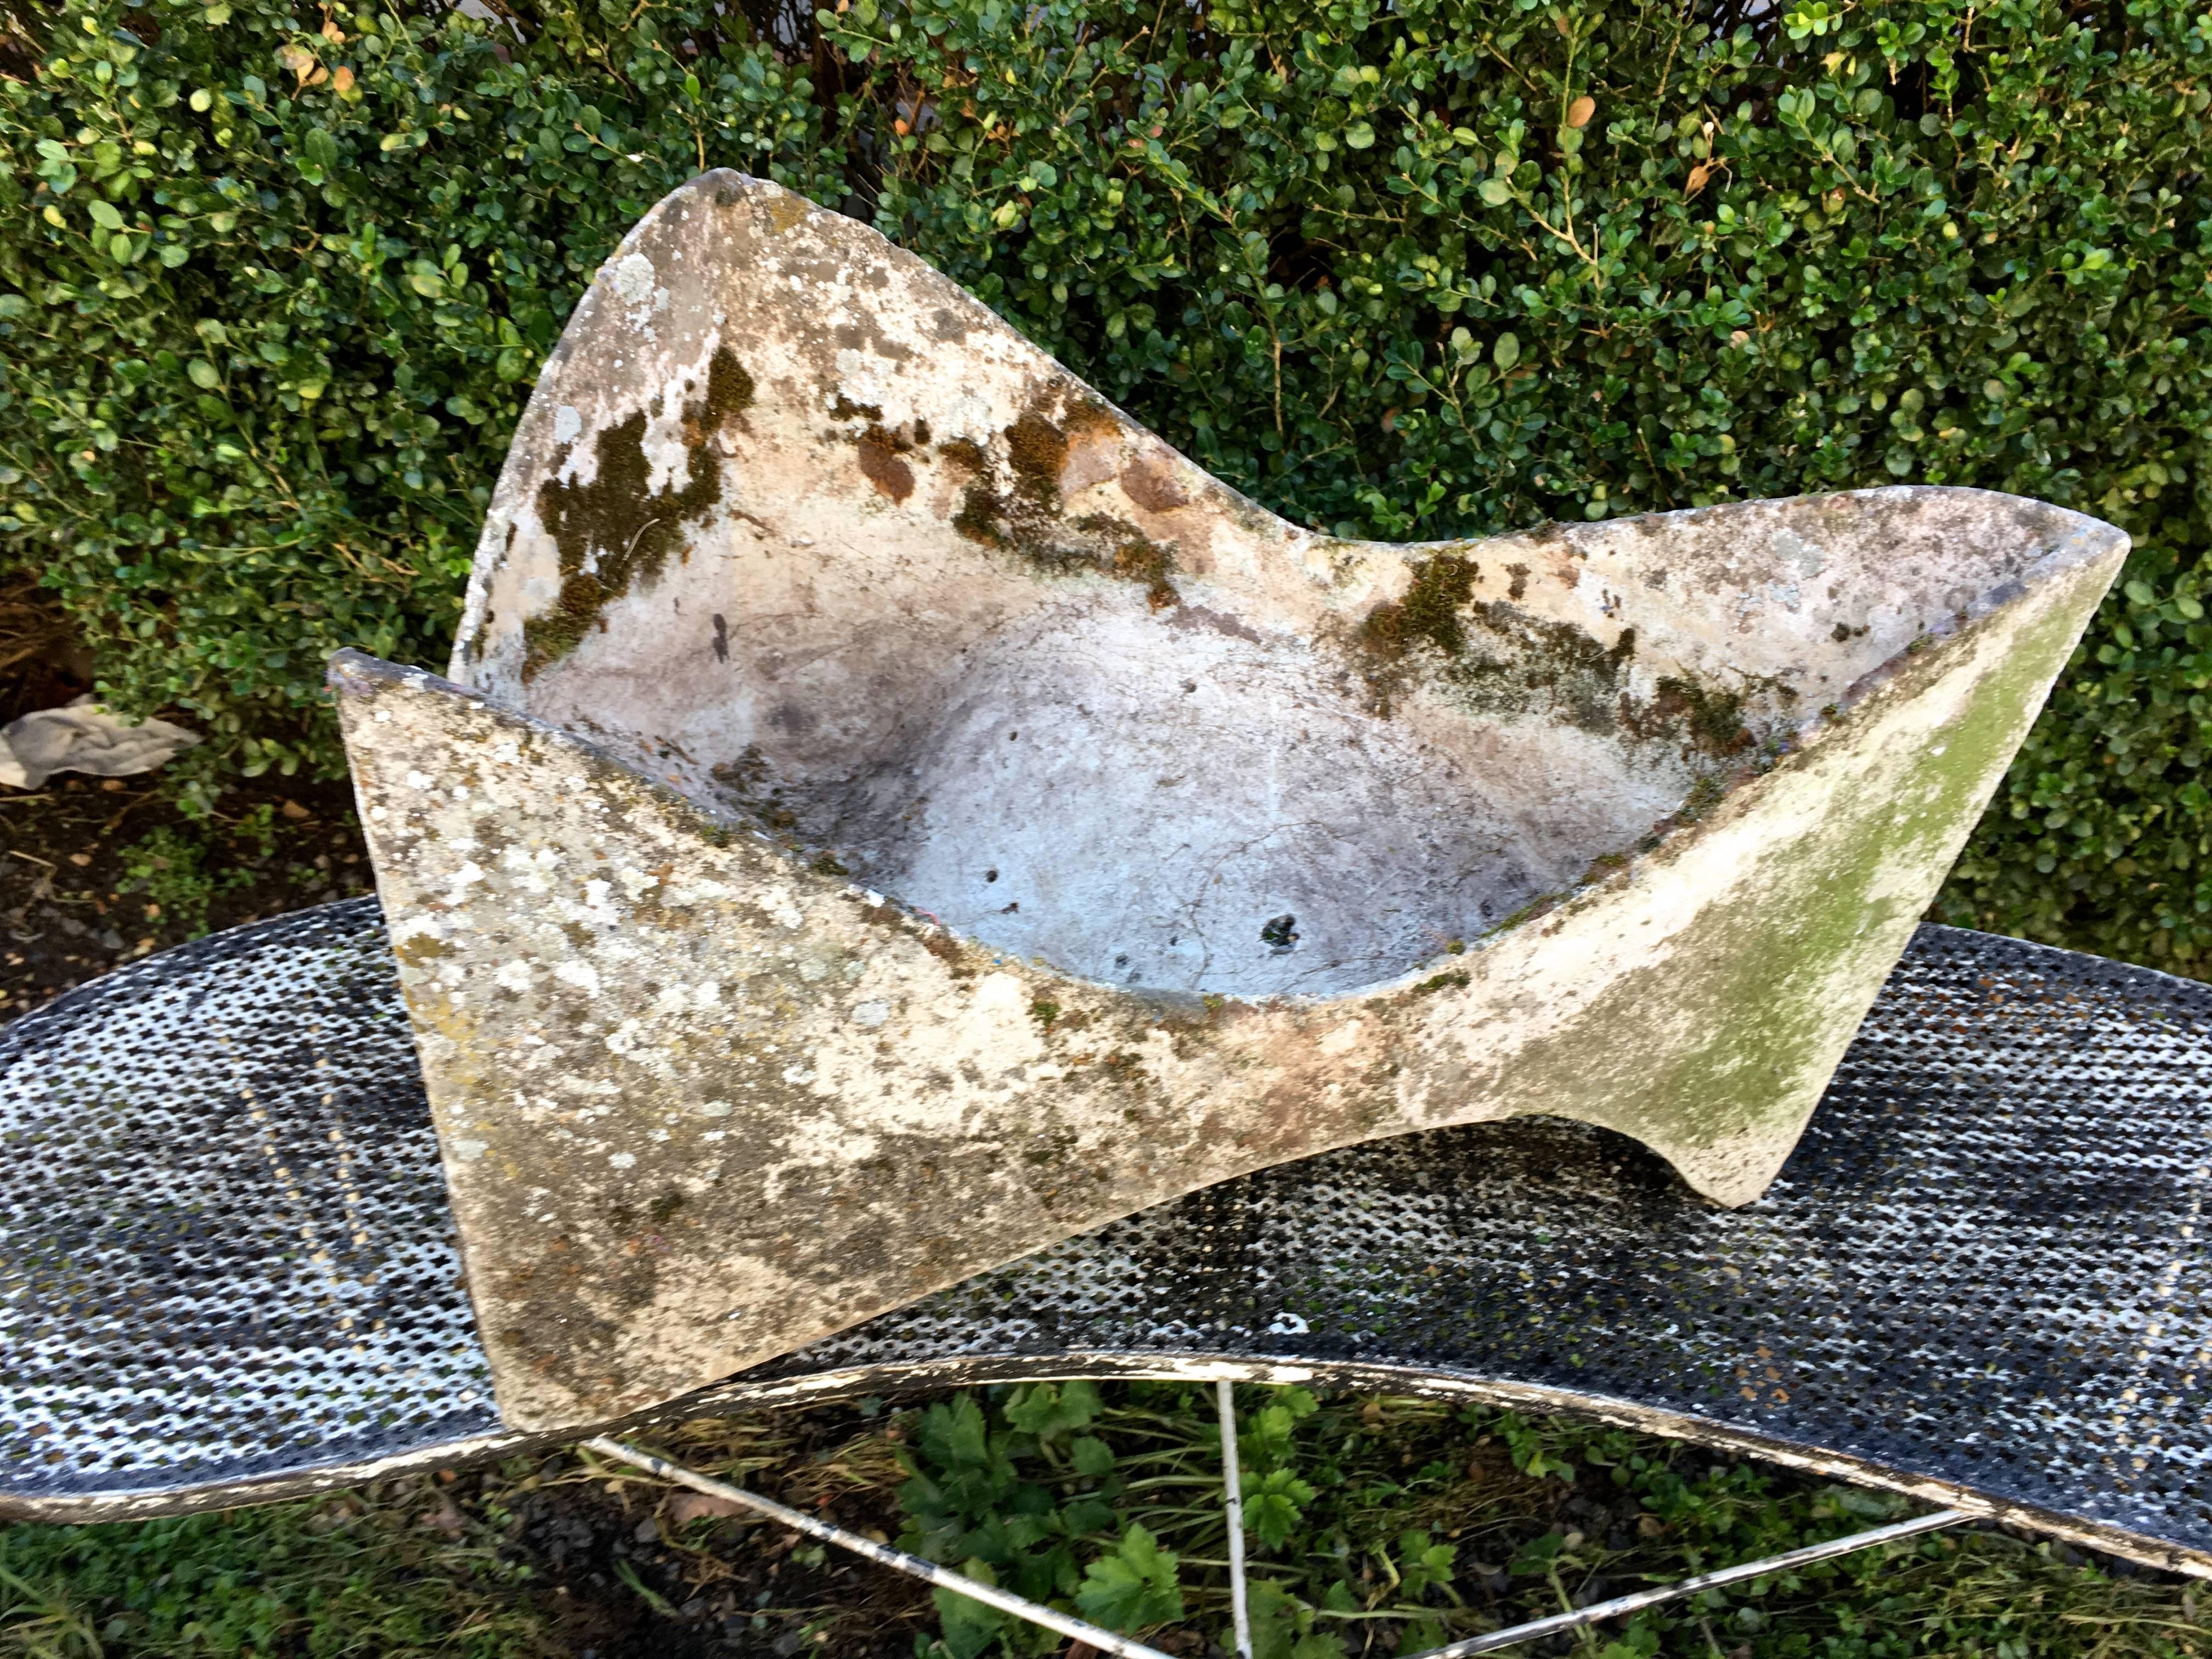 What a find! We never see these rare and very sculptural Wily Guhl free-form planters, but were lucky enough to score a pair on our last buying trip. Both are in perfect condition with amazing mossy and lichened patina and have incised production